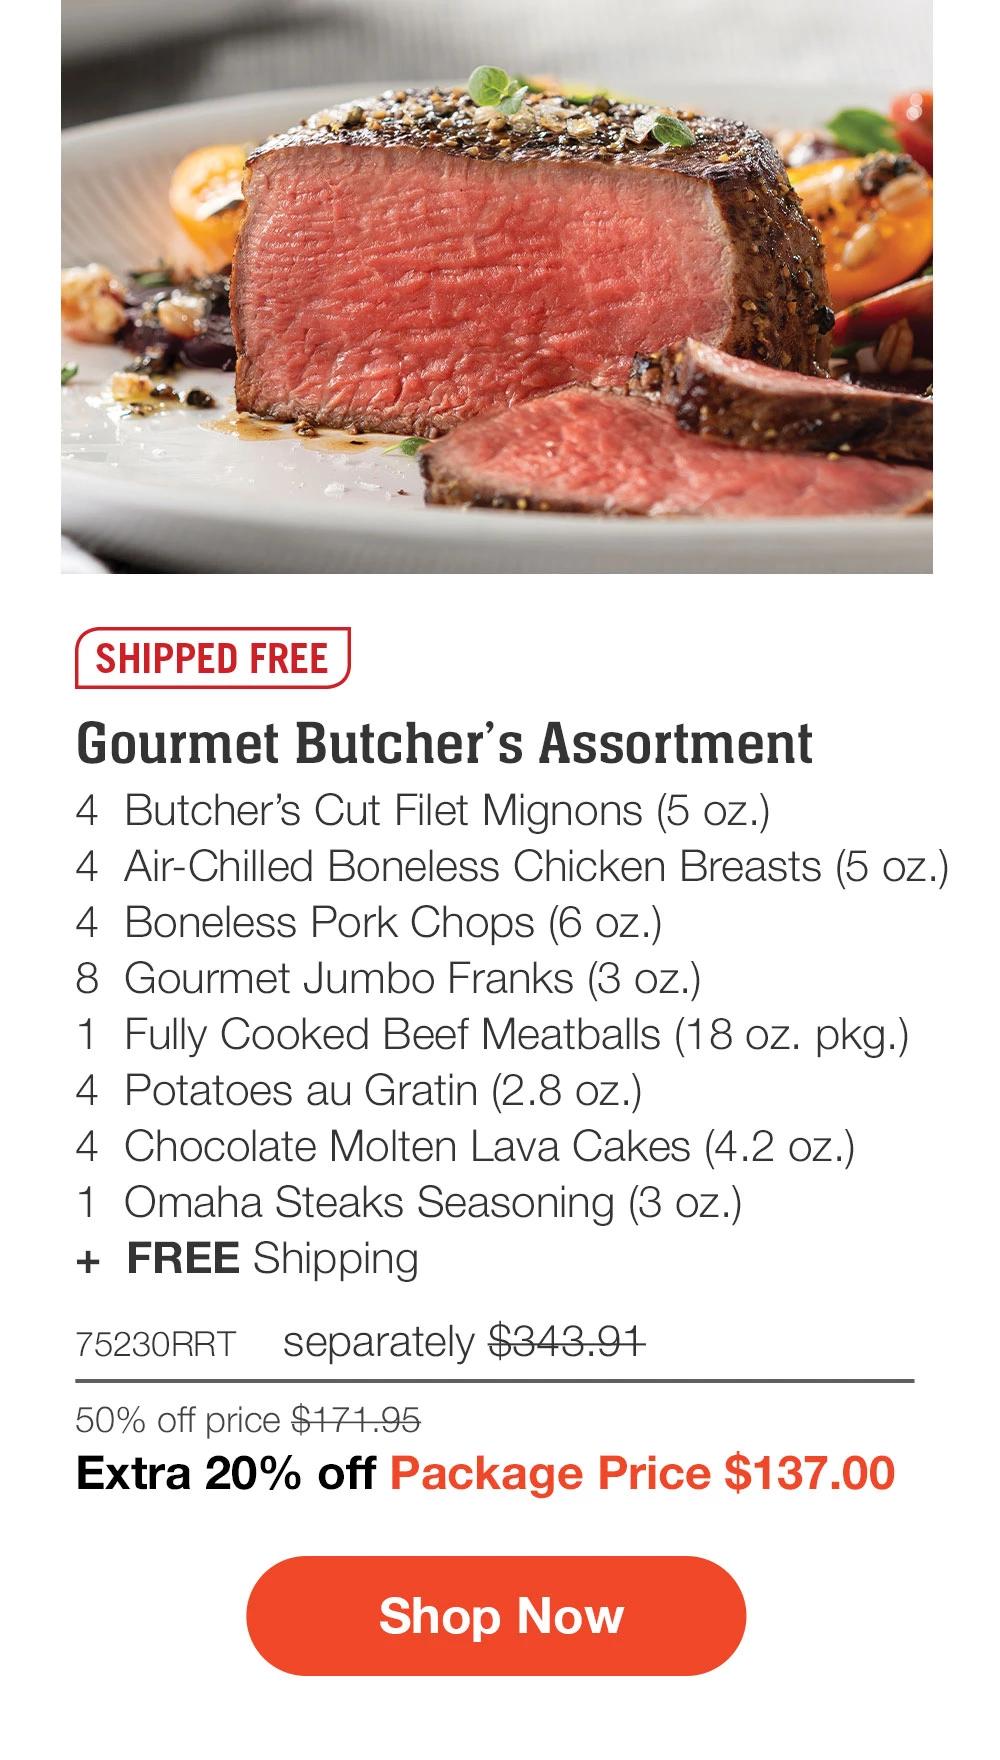 SHIPPED FREE | Gourmet Butcher's Assortment - 4  Butcher's Cut Filet Mignons (5 oz.) - 4  Air-Chilled Boneless Chicken Breasts (5 oz.) - 4  Boneless Pork Chops (6 oz.) - 8  Gourmet Jumbo Franks (3 oz.) - 1  Fully Cooked Beef Meatballs (18 oz. pkg.) - 4  Potatoes au Gratin (2.8 oz.) - 4  Chocolate Molten Lava Cakes (4.2 oz.) - 1  Omaha Steaks Seasoning (3 oz.)  +  FREE Shipping - 75230RRT separately $343.91 | 50% off price $171.95 | Extra 20% off Package Price $137.00 || SHOP NOW